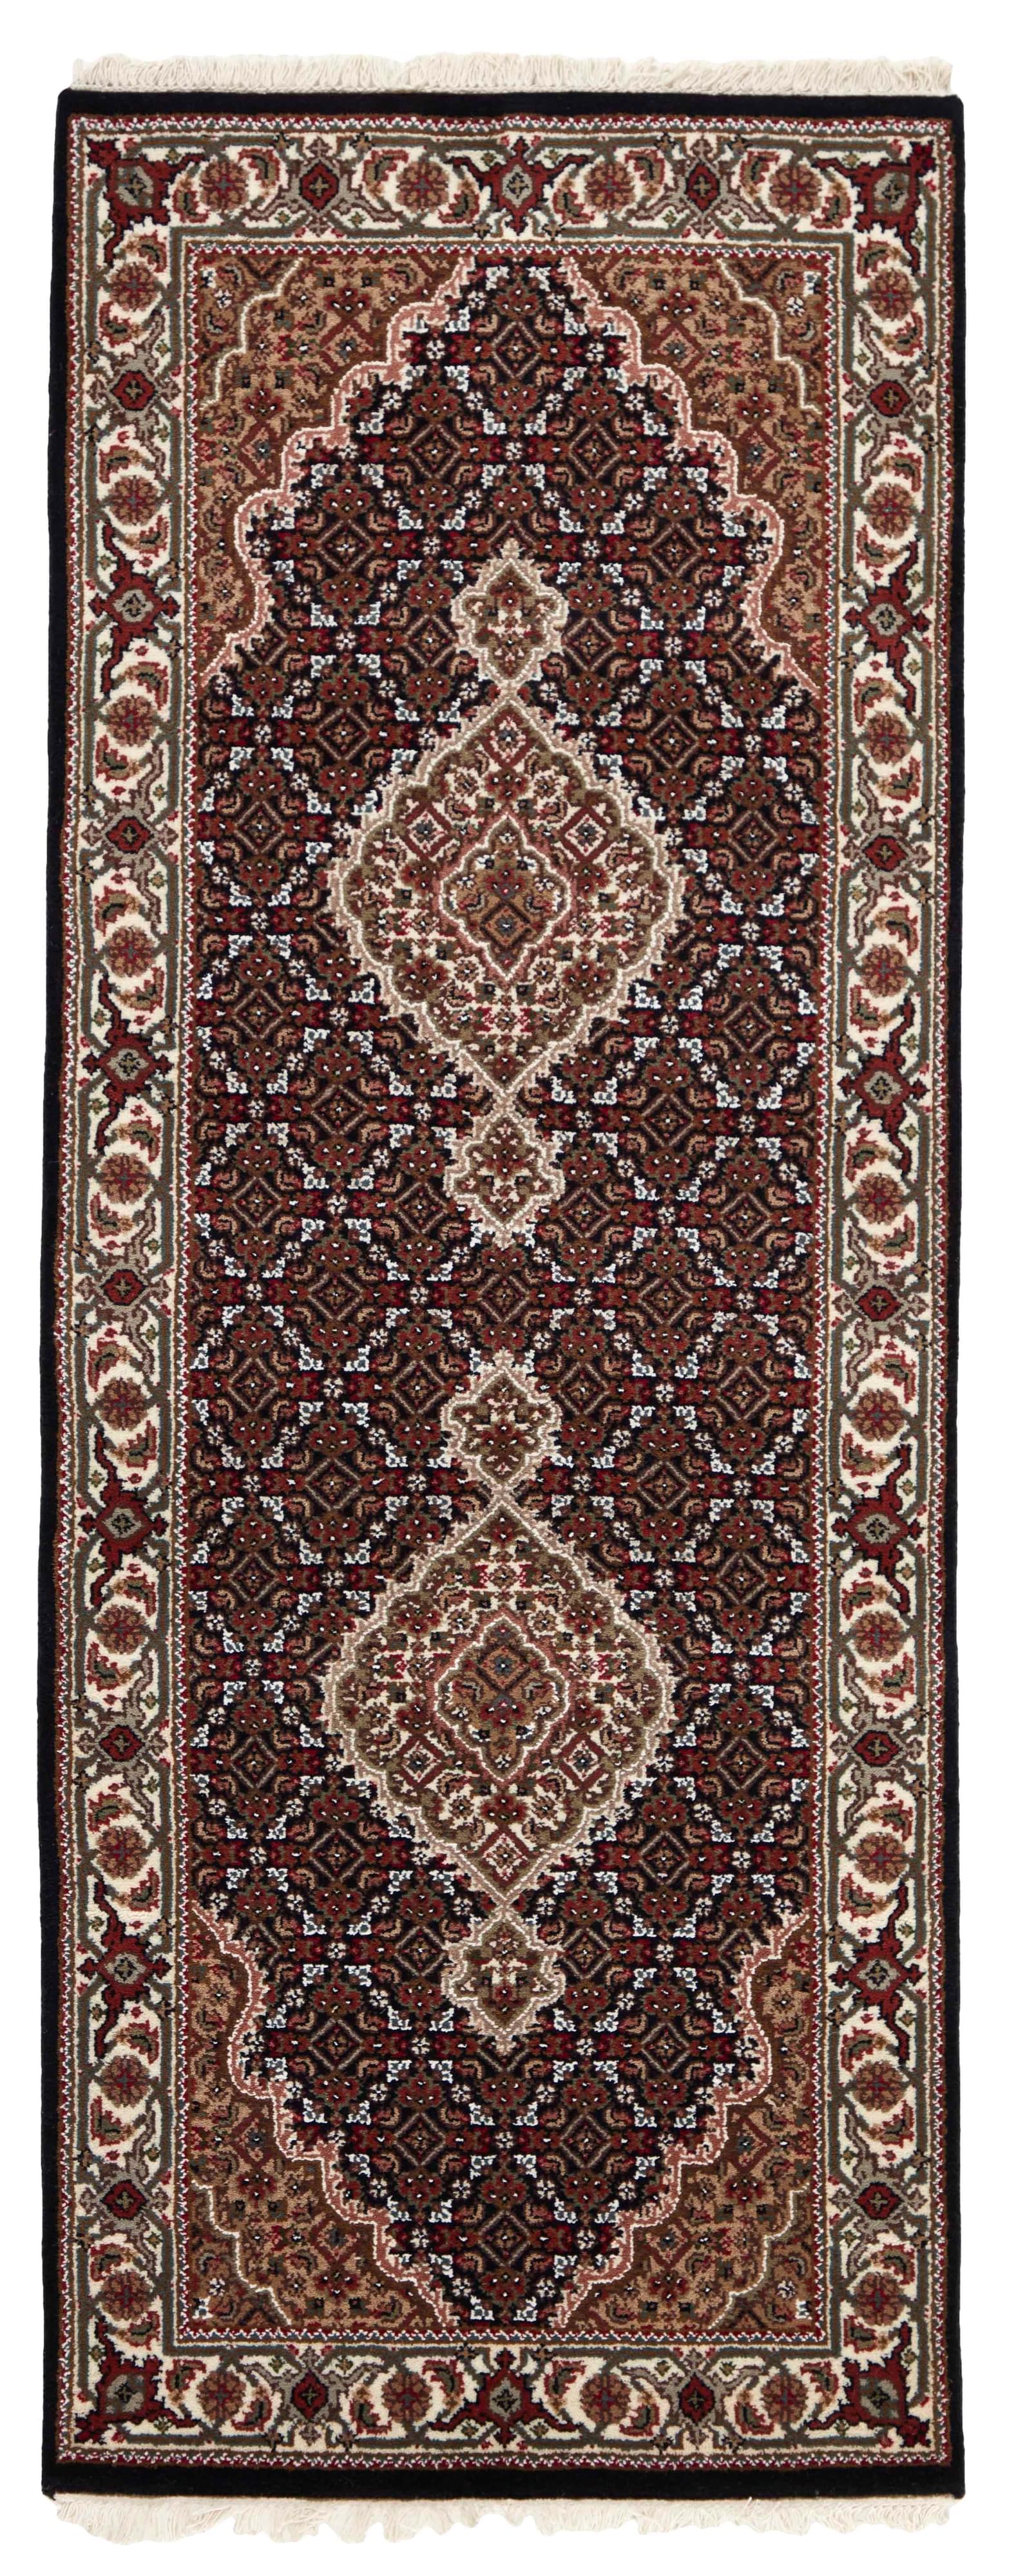 Authentic Oriental runner with traditional geometric and floral design in red, beige, brown and black